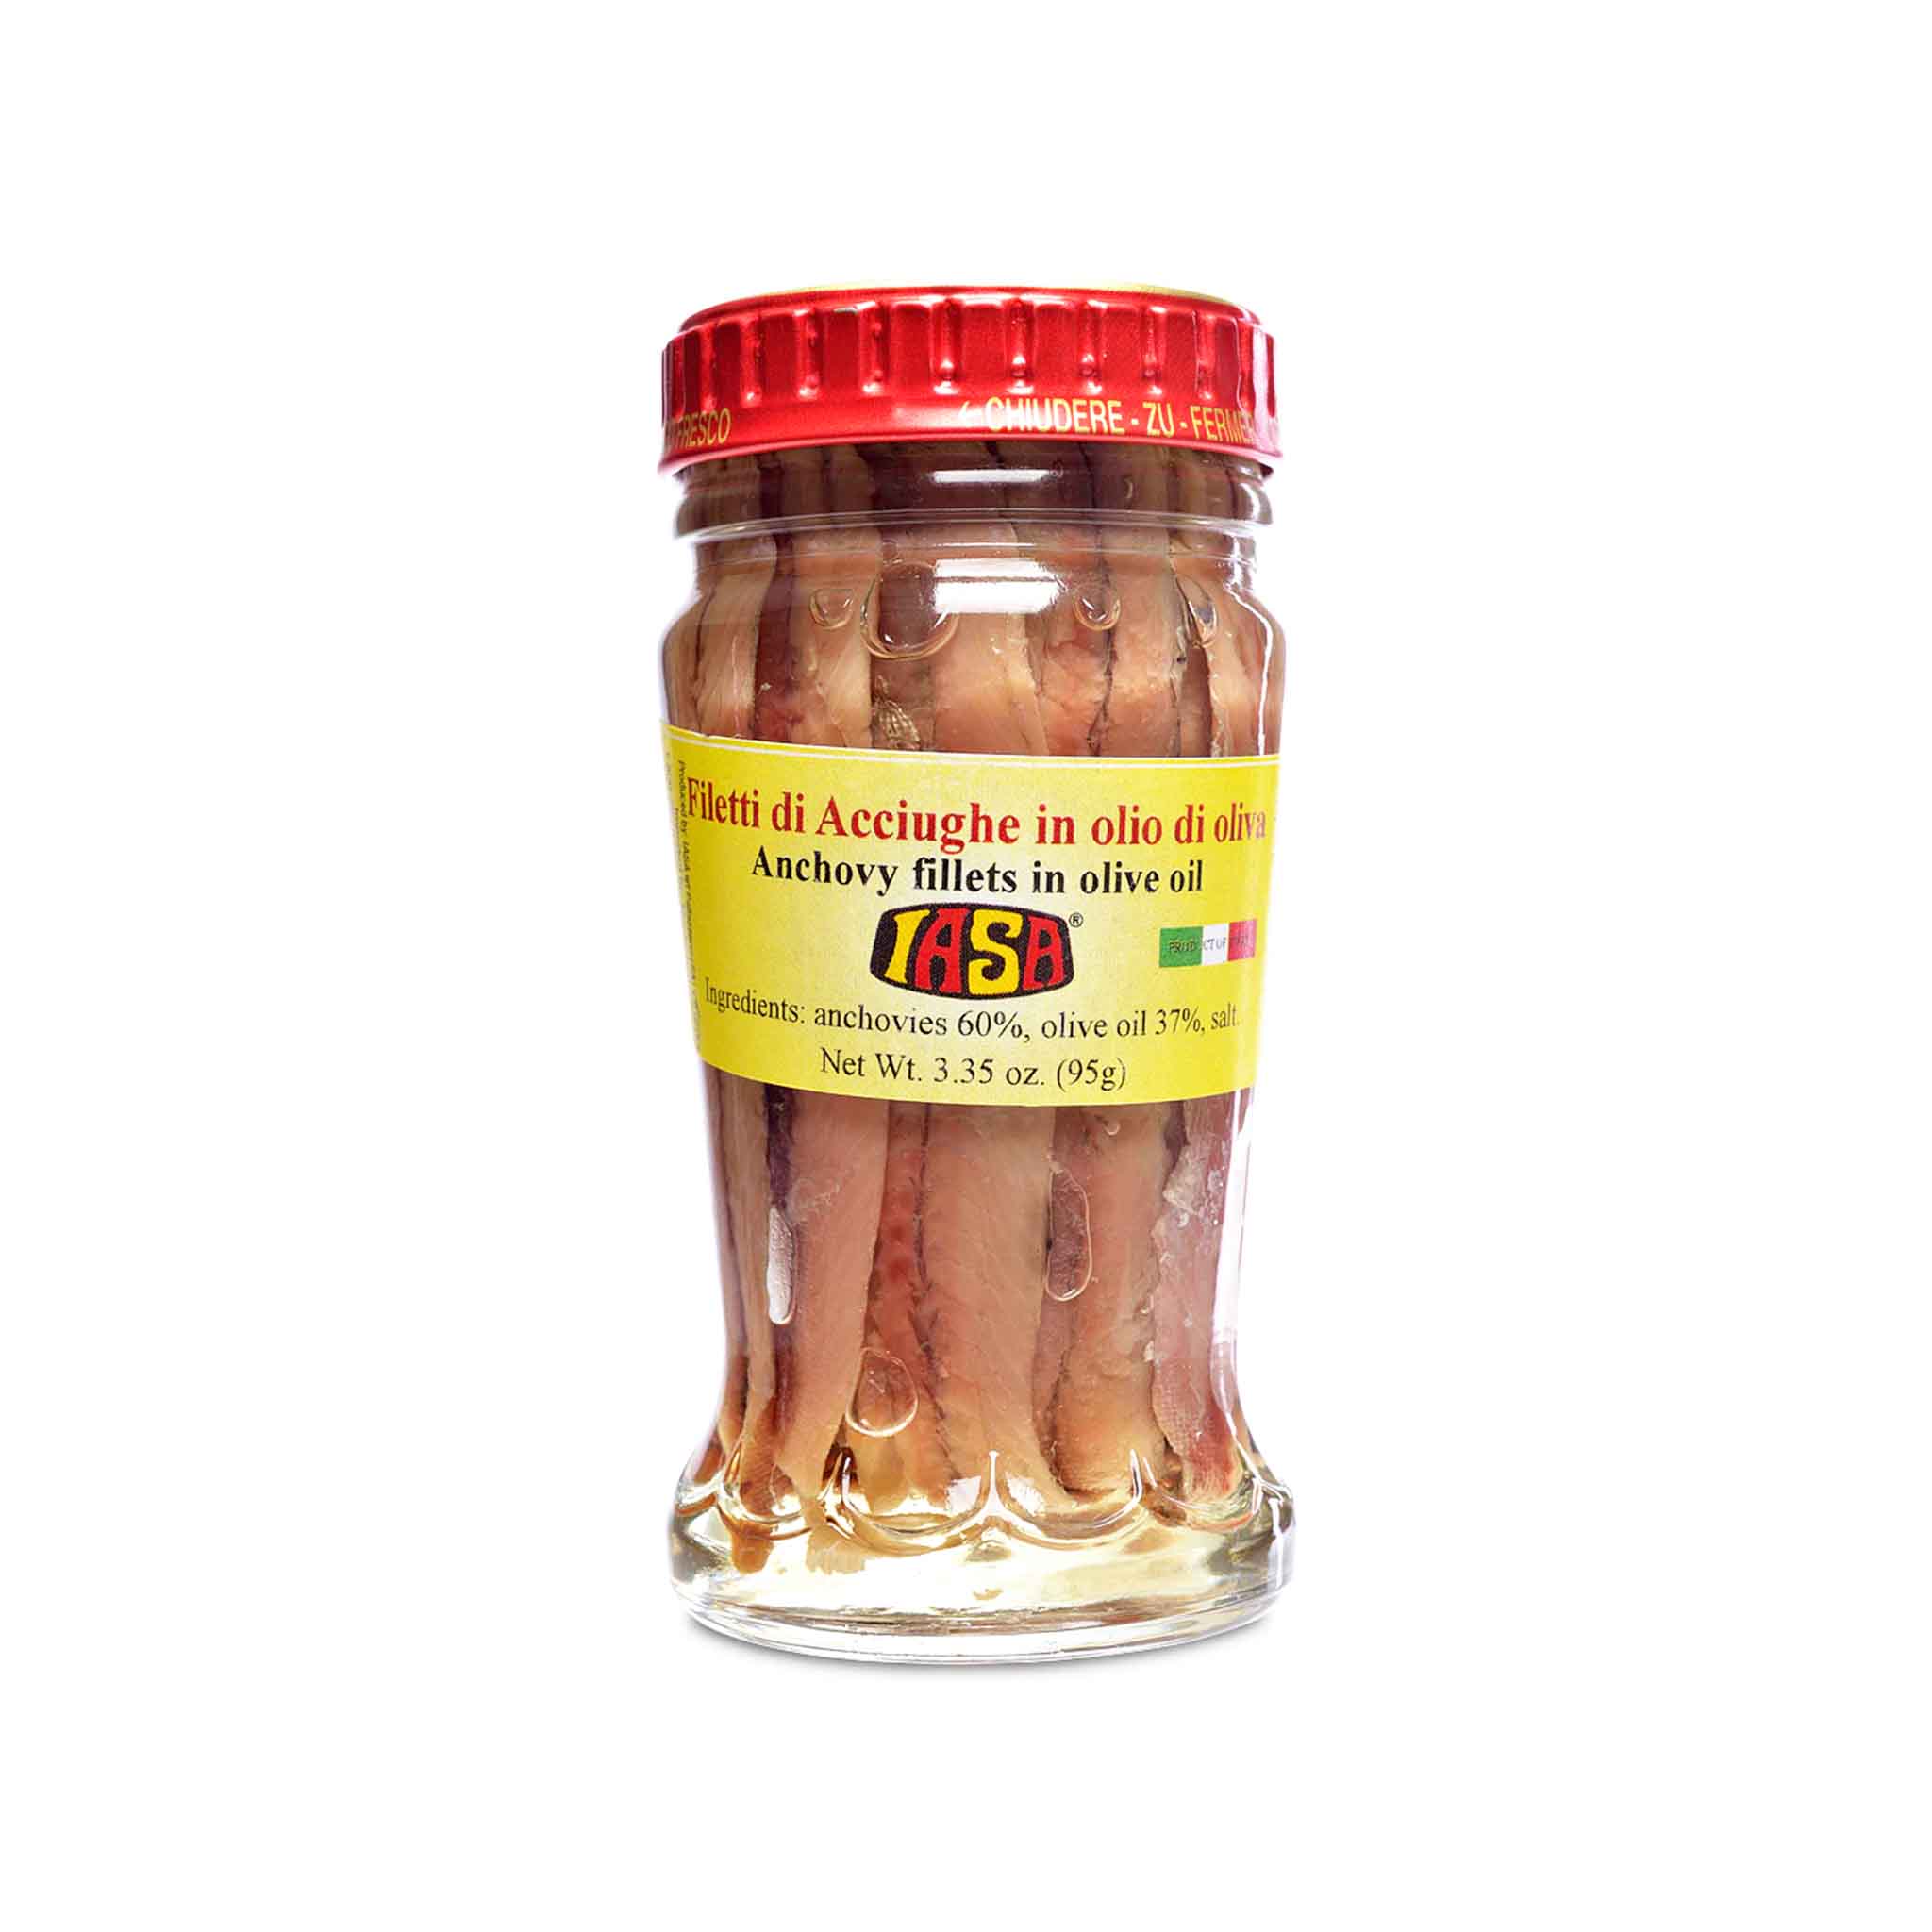 IASA ANCHOVIES IN EXTRA VIRGIN OLIVE OIL 95g